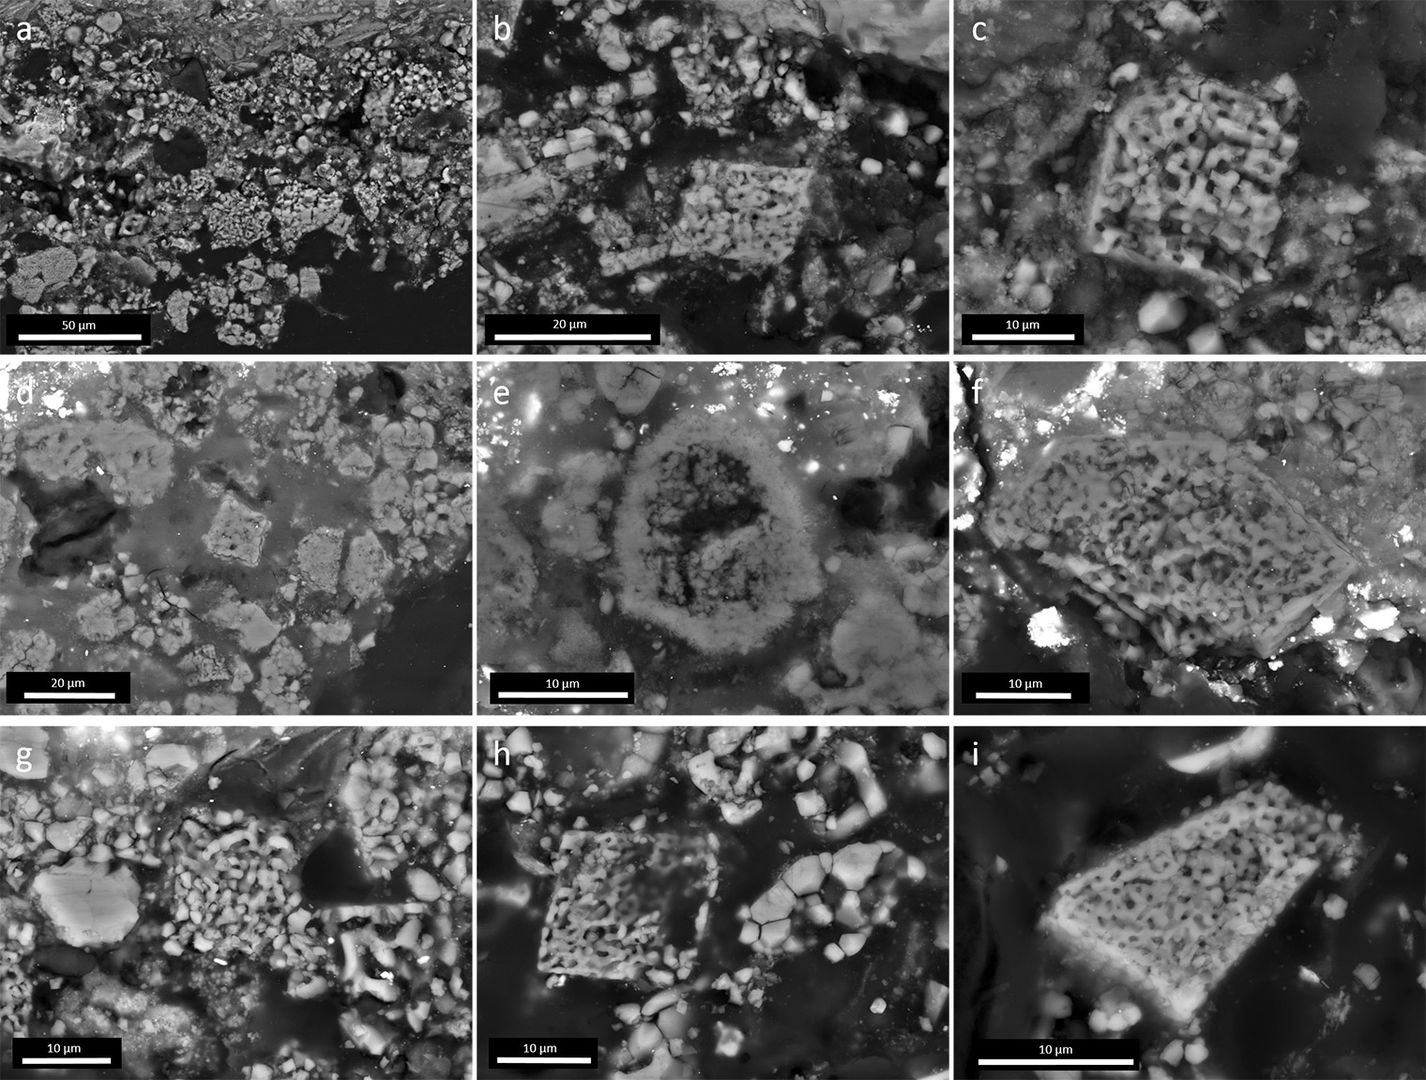 A three-by-three grid view of nine black and white scientific images of microscopic particle samples 